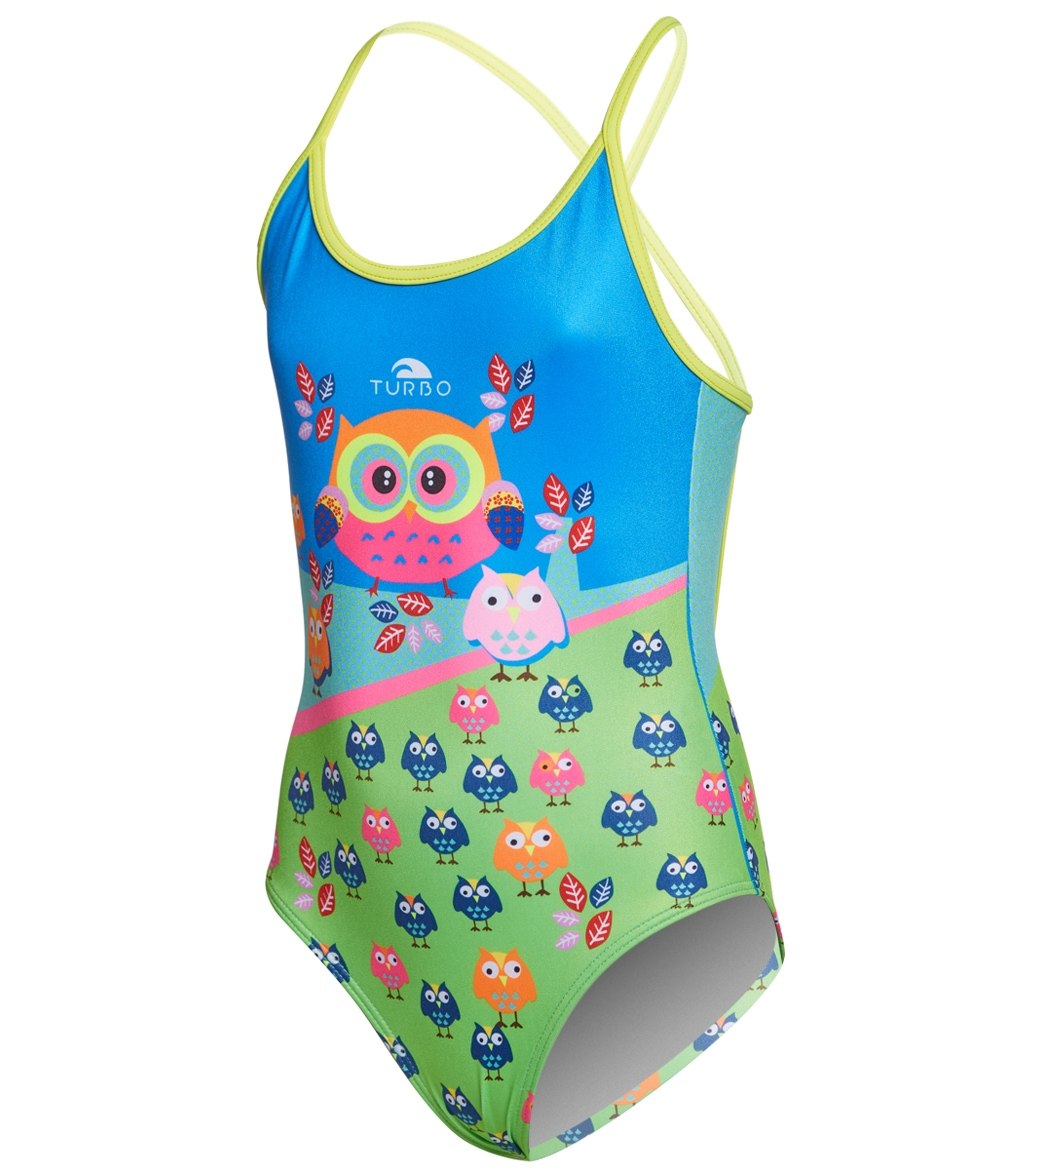 Turbo Girls' Owls One Piece Swimsuit - Multi 12 Months Polyester/Pbt - Swimoutlet.com